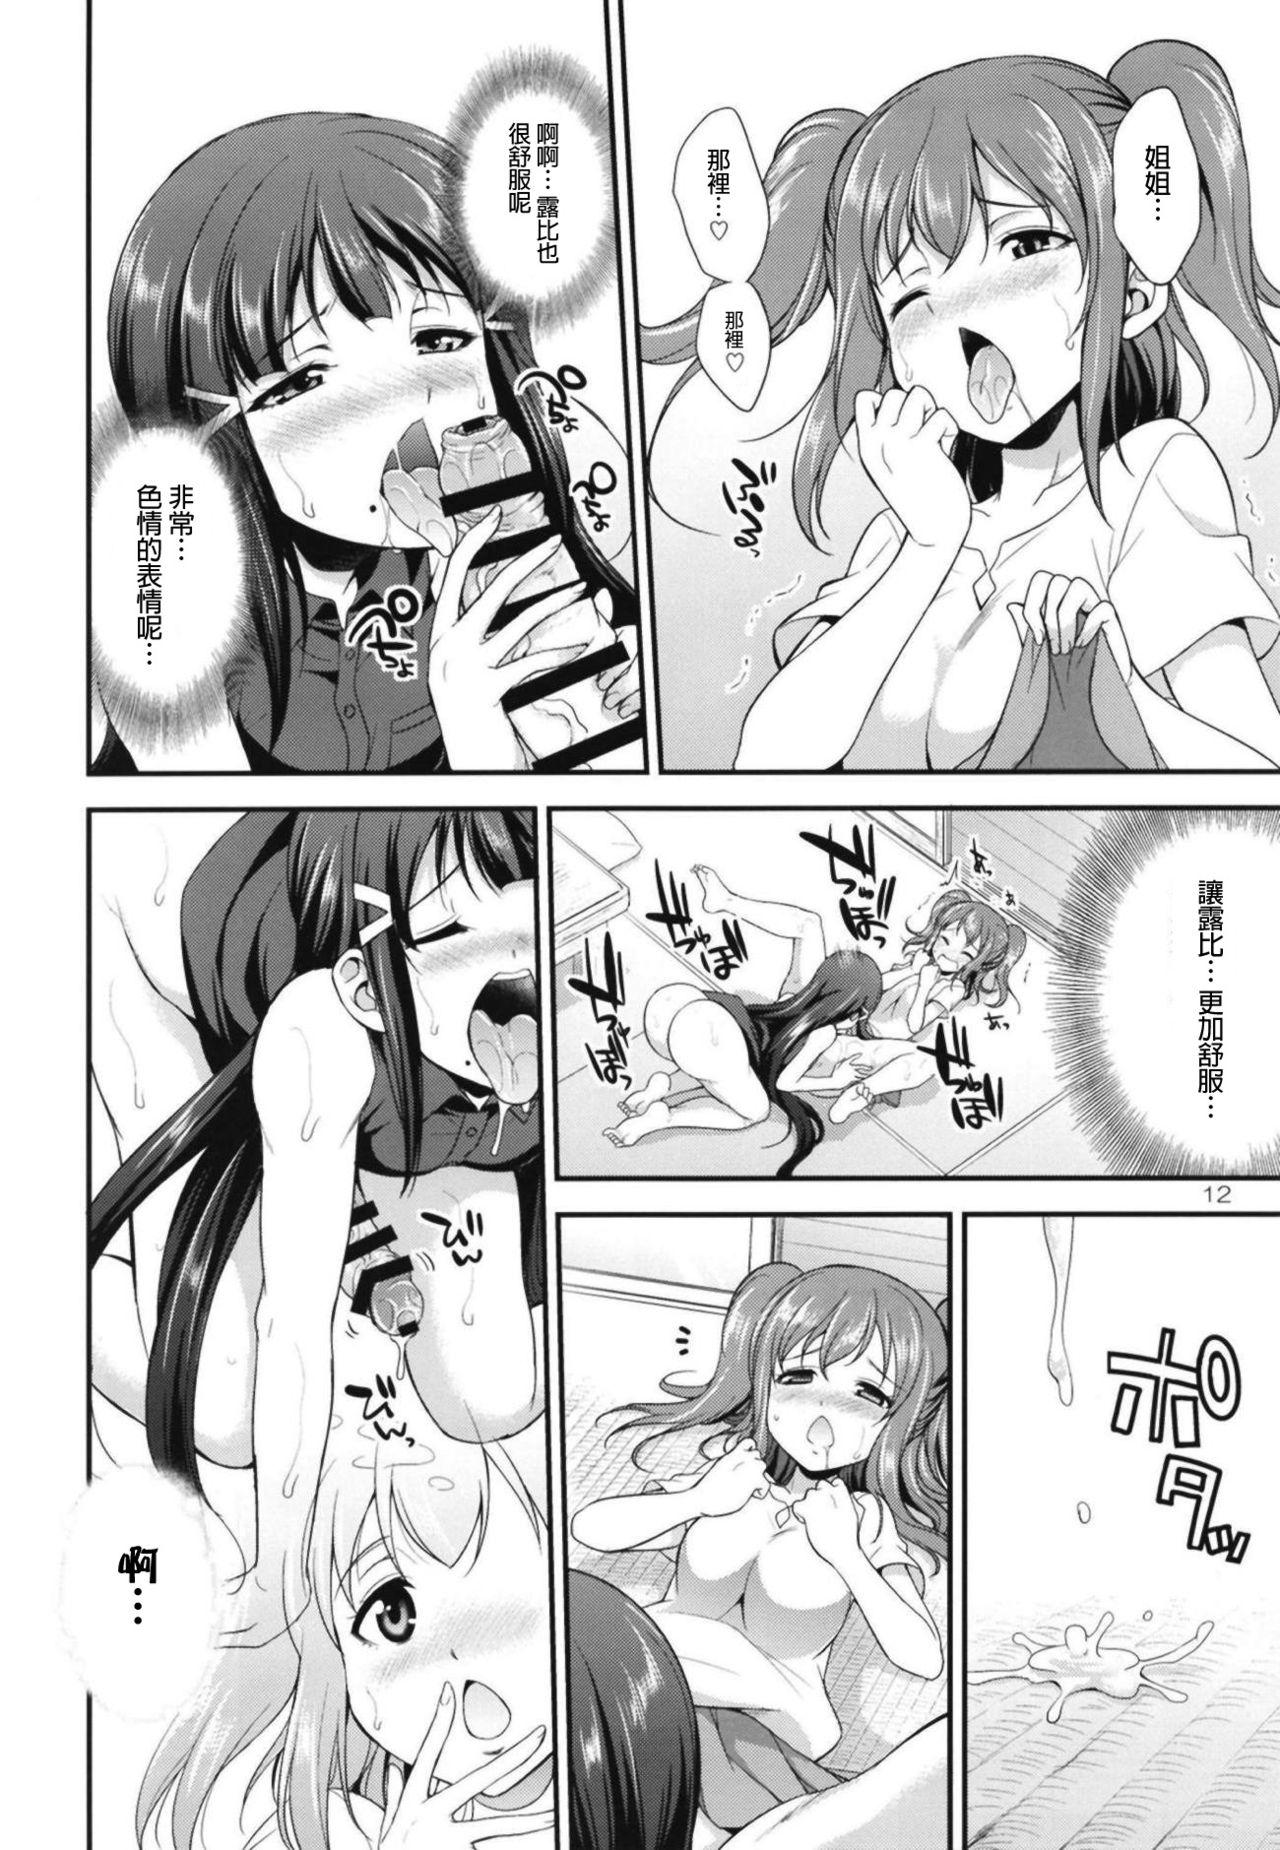 Gay Hairy FUTAqours side-dia&ruby - Love live sunshine Amature Allure - Page 12